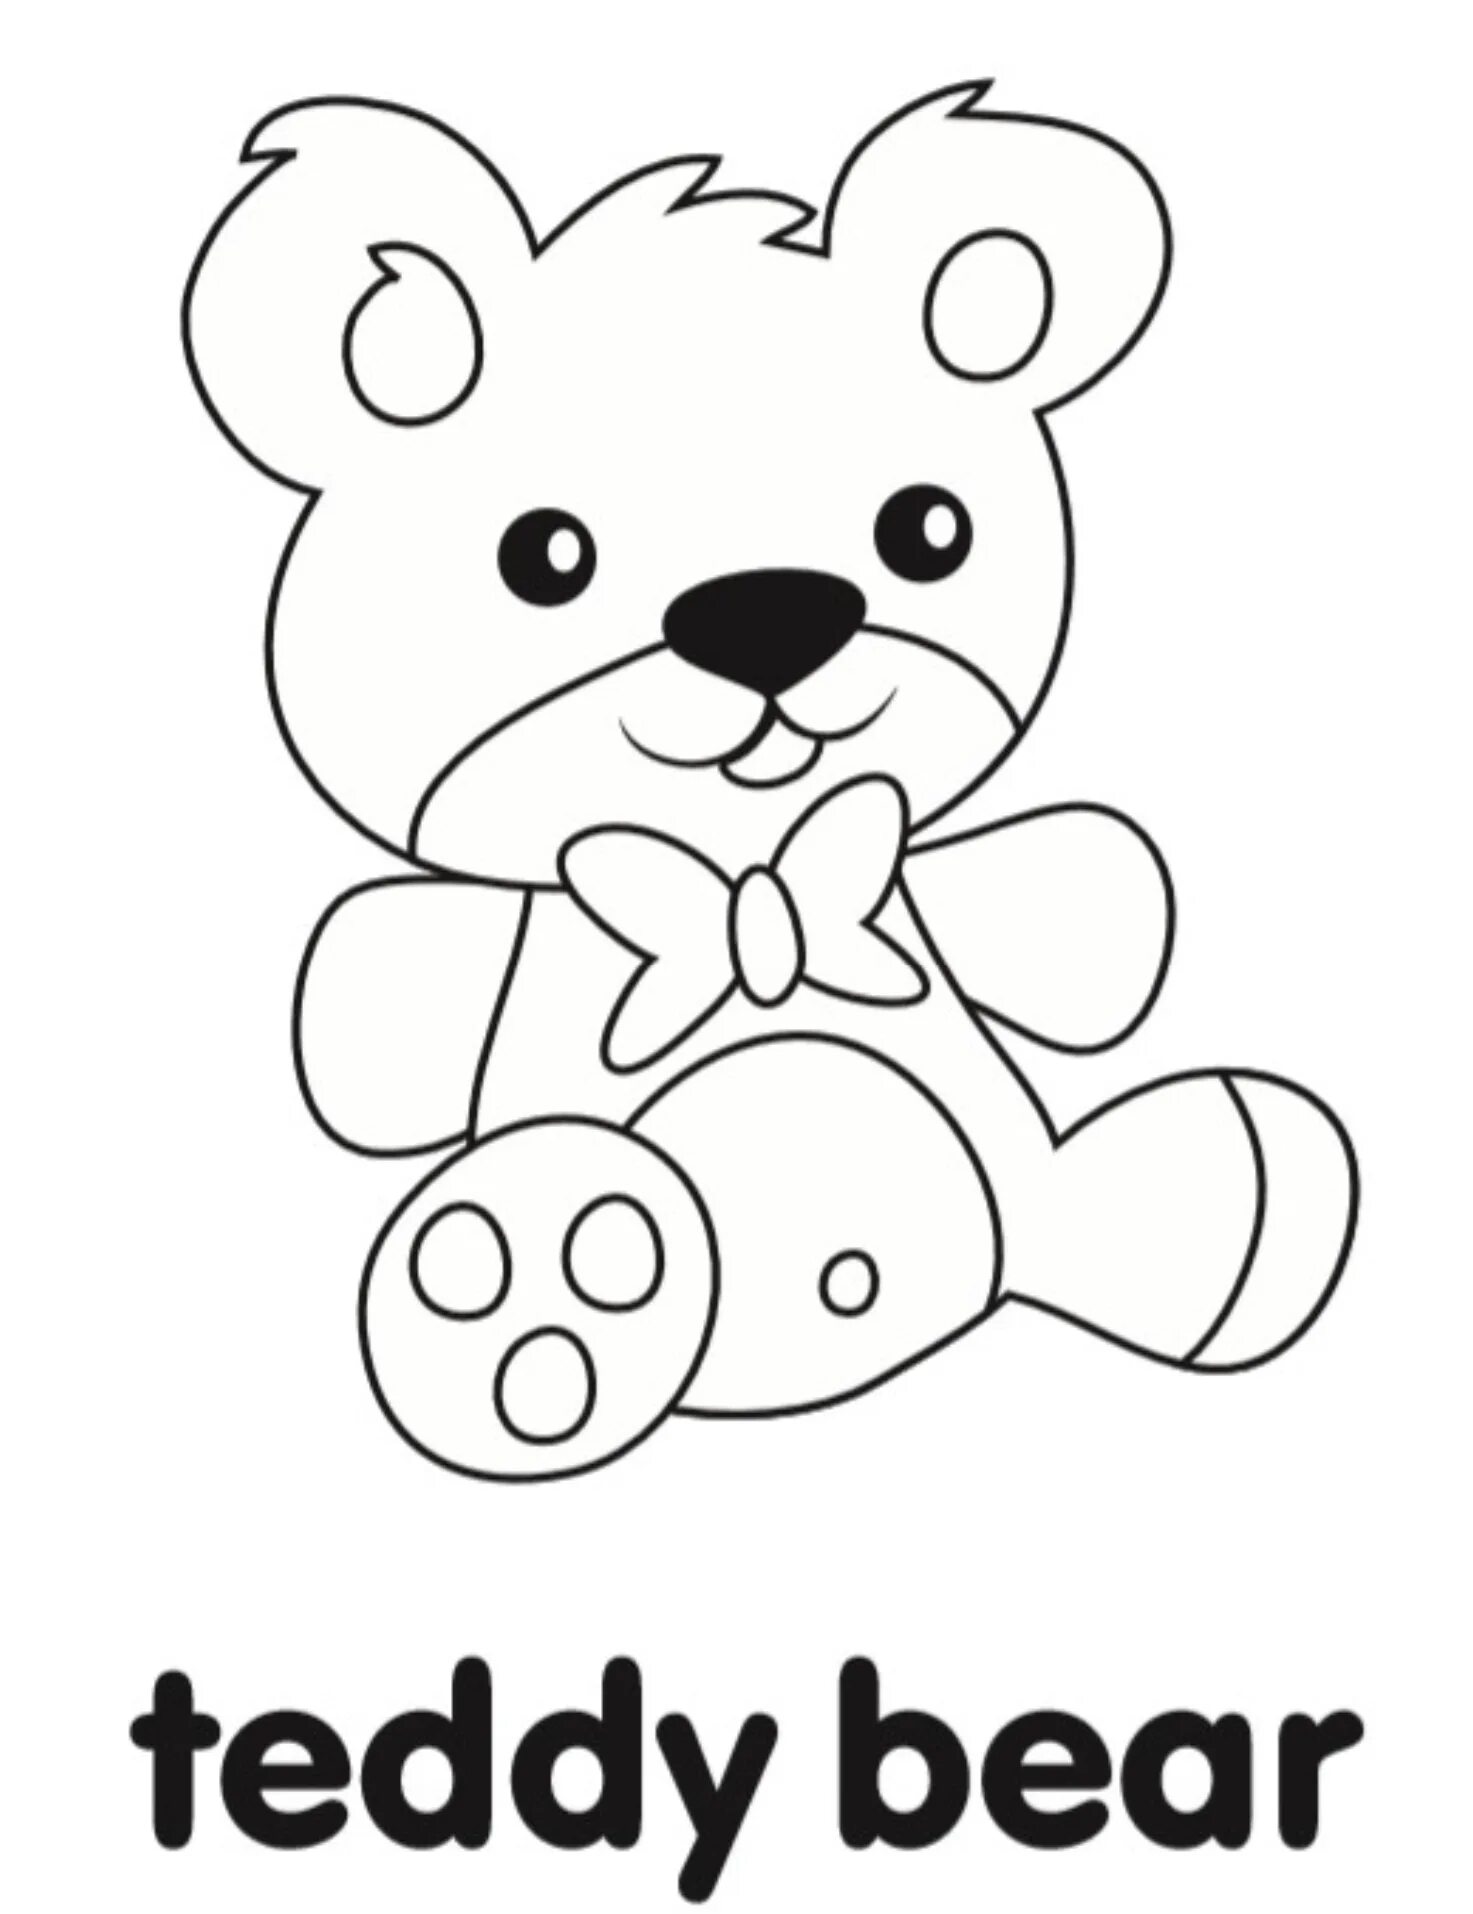 Coloring page affectionate teddy bear